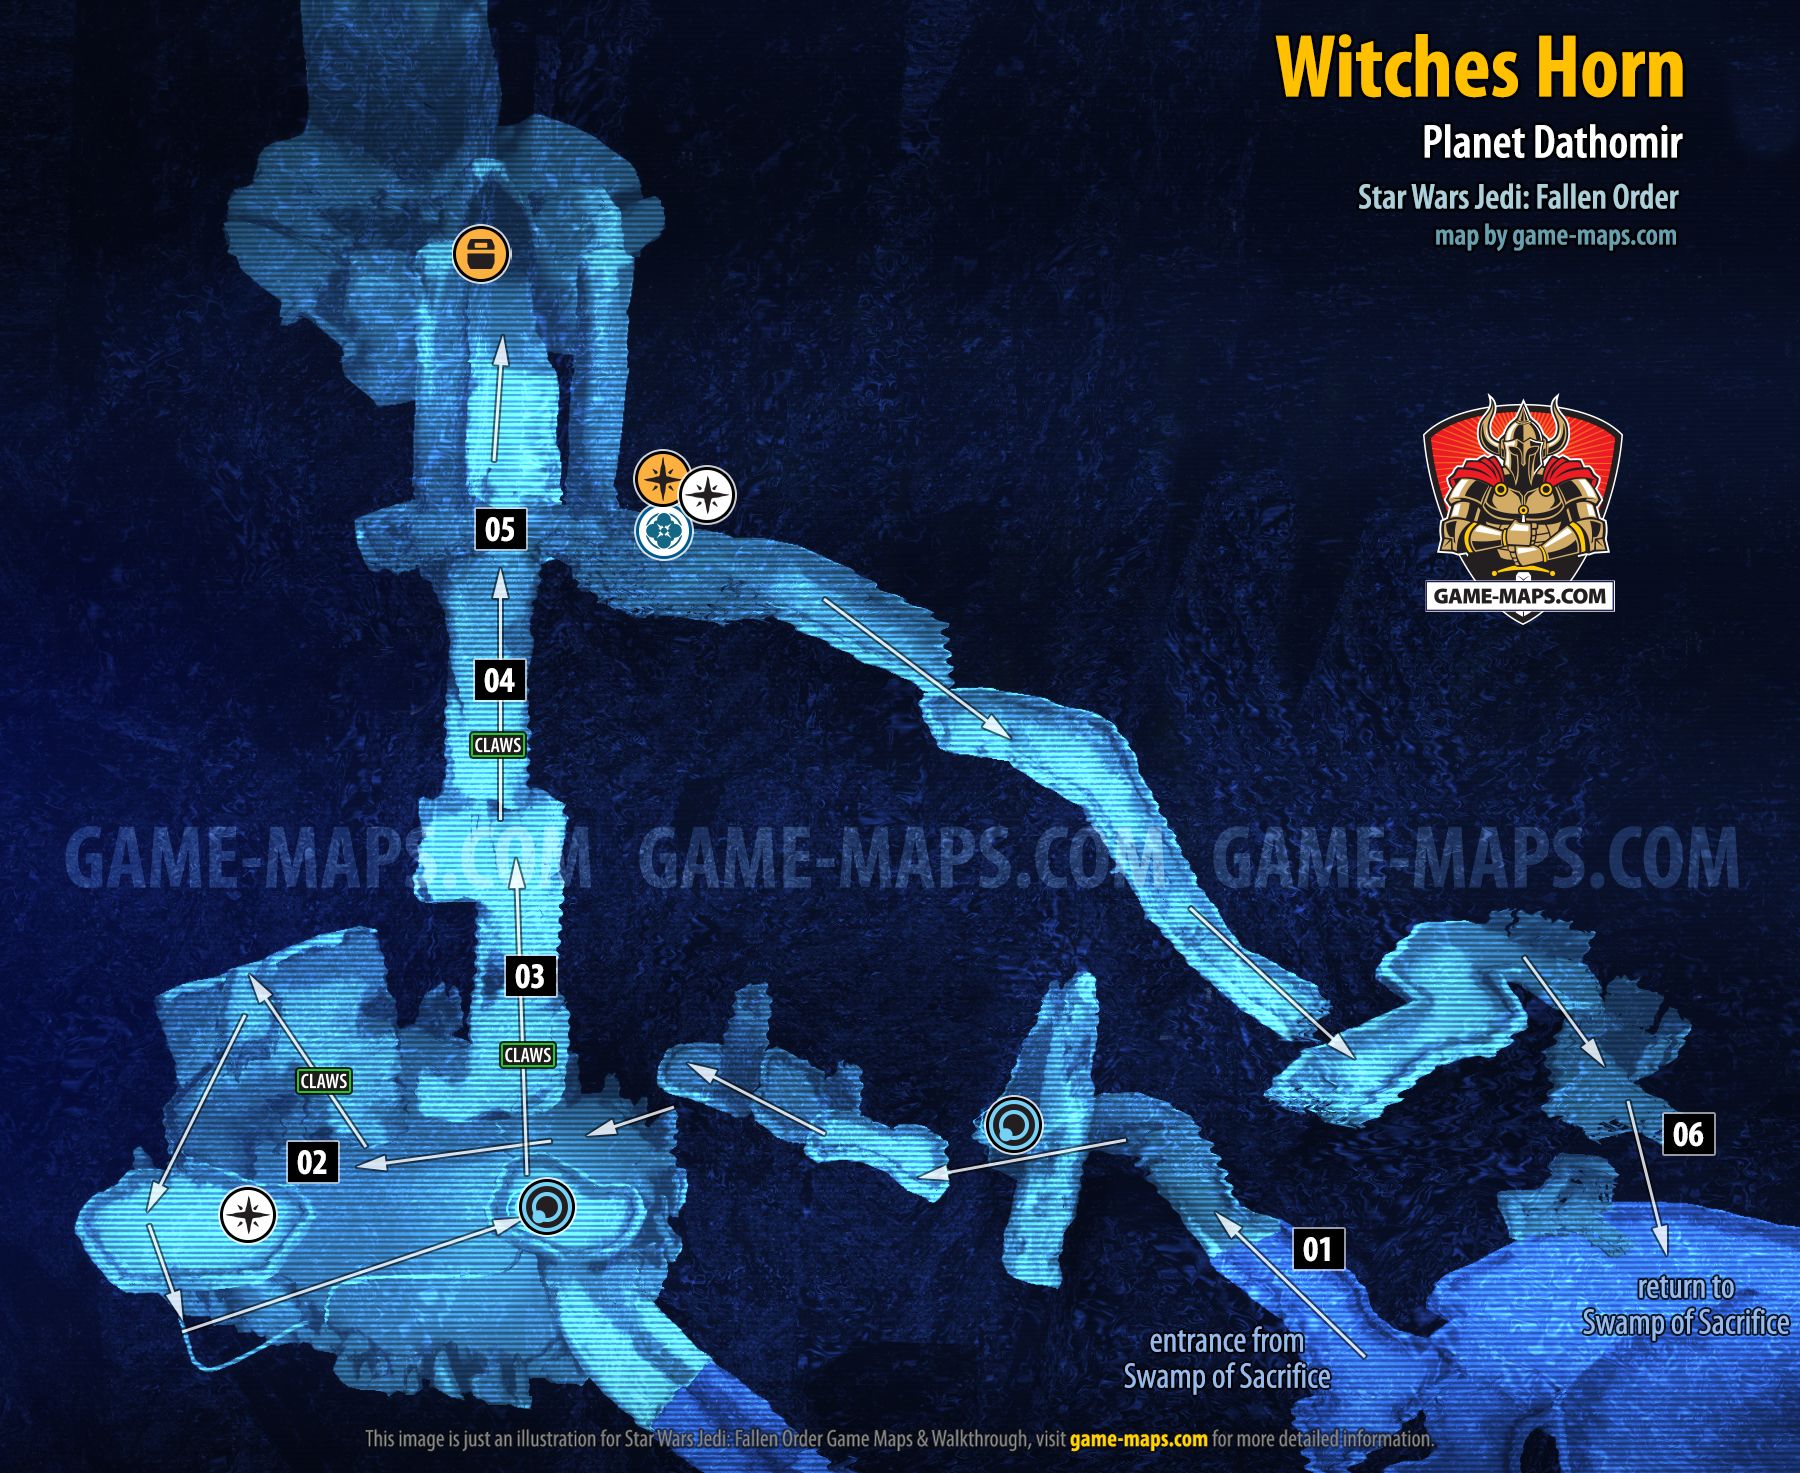 Witches Horn Map, Planet Dathomir for Star Wars Jedi Fallen Order